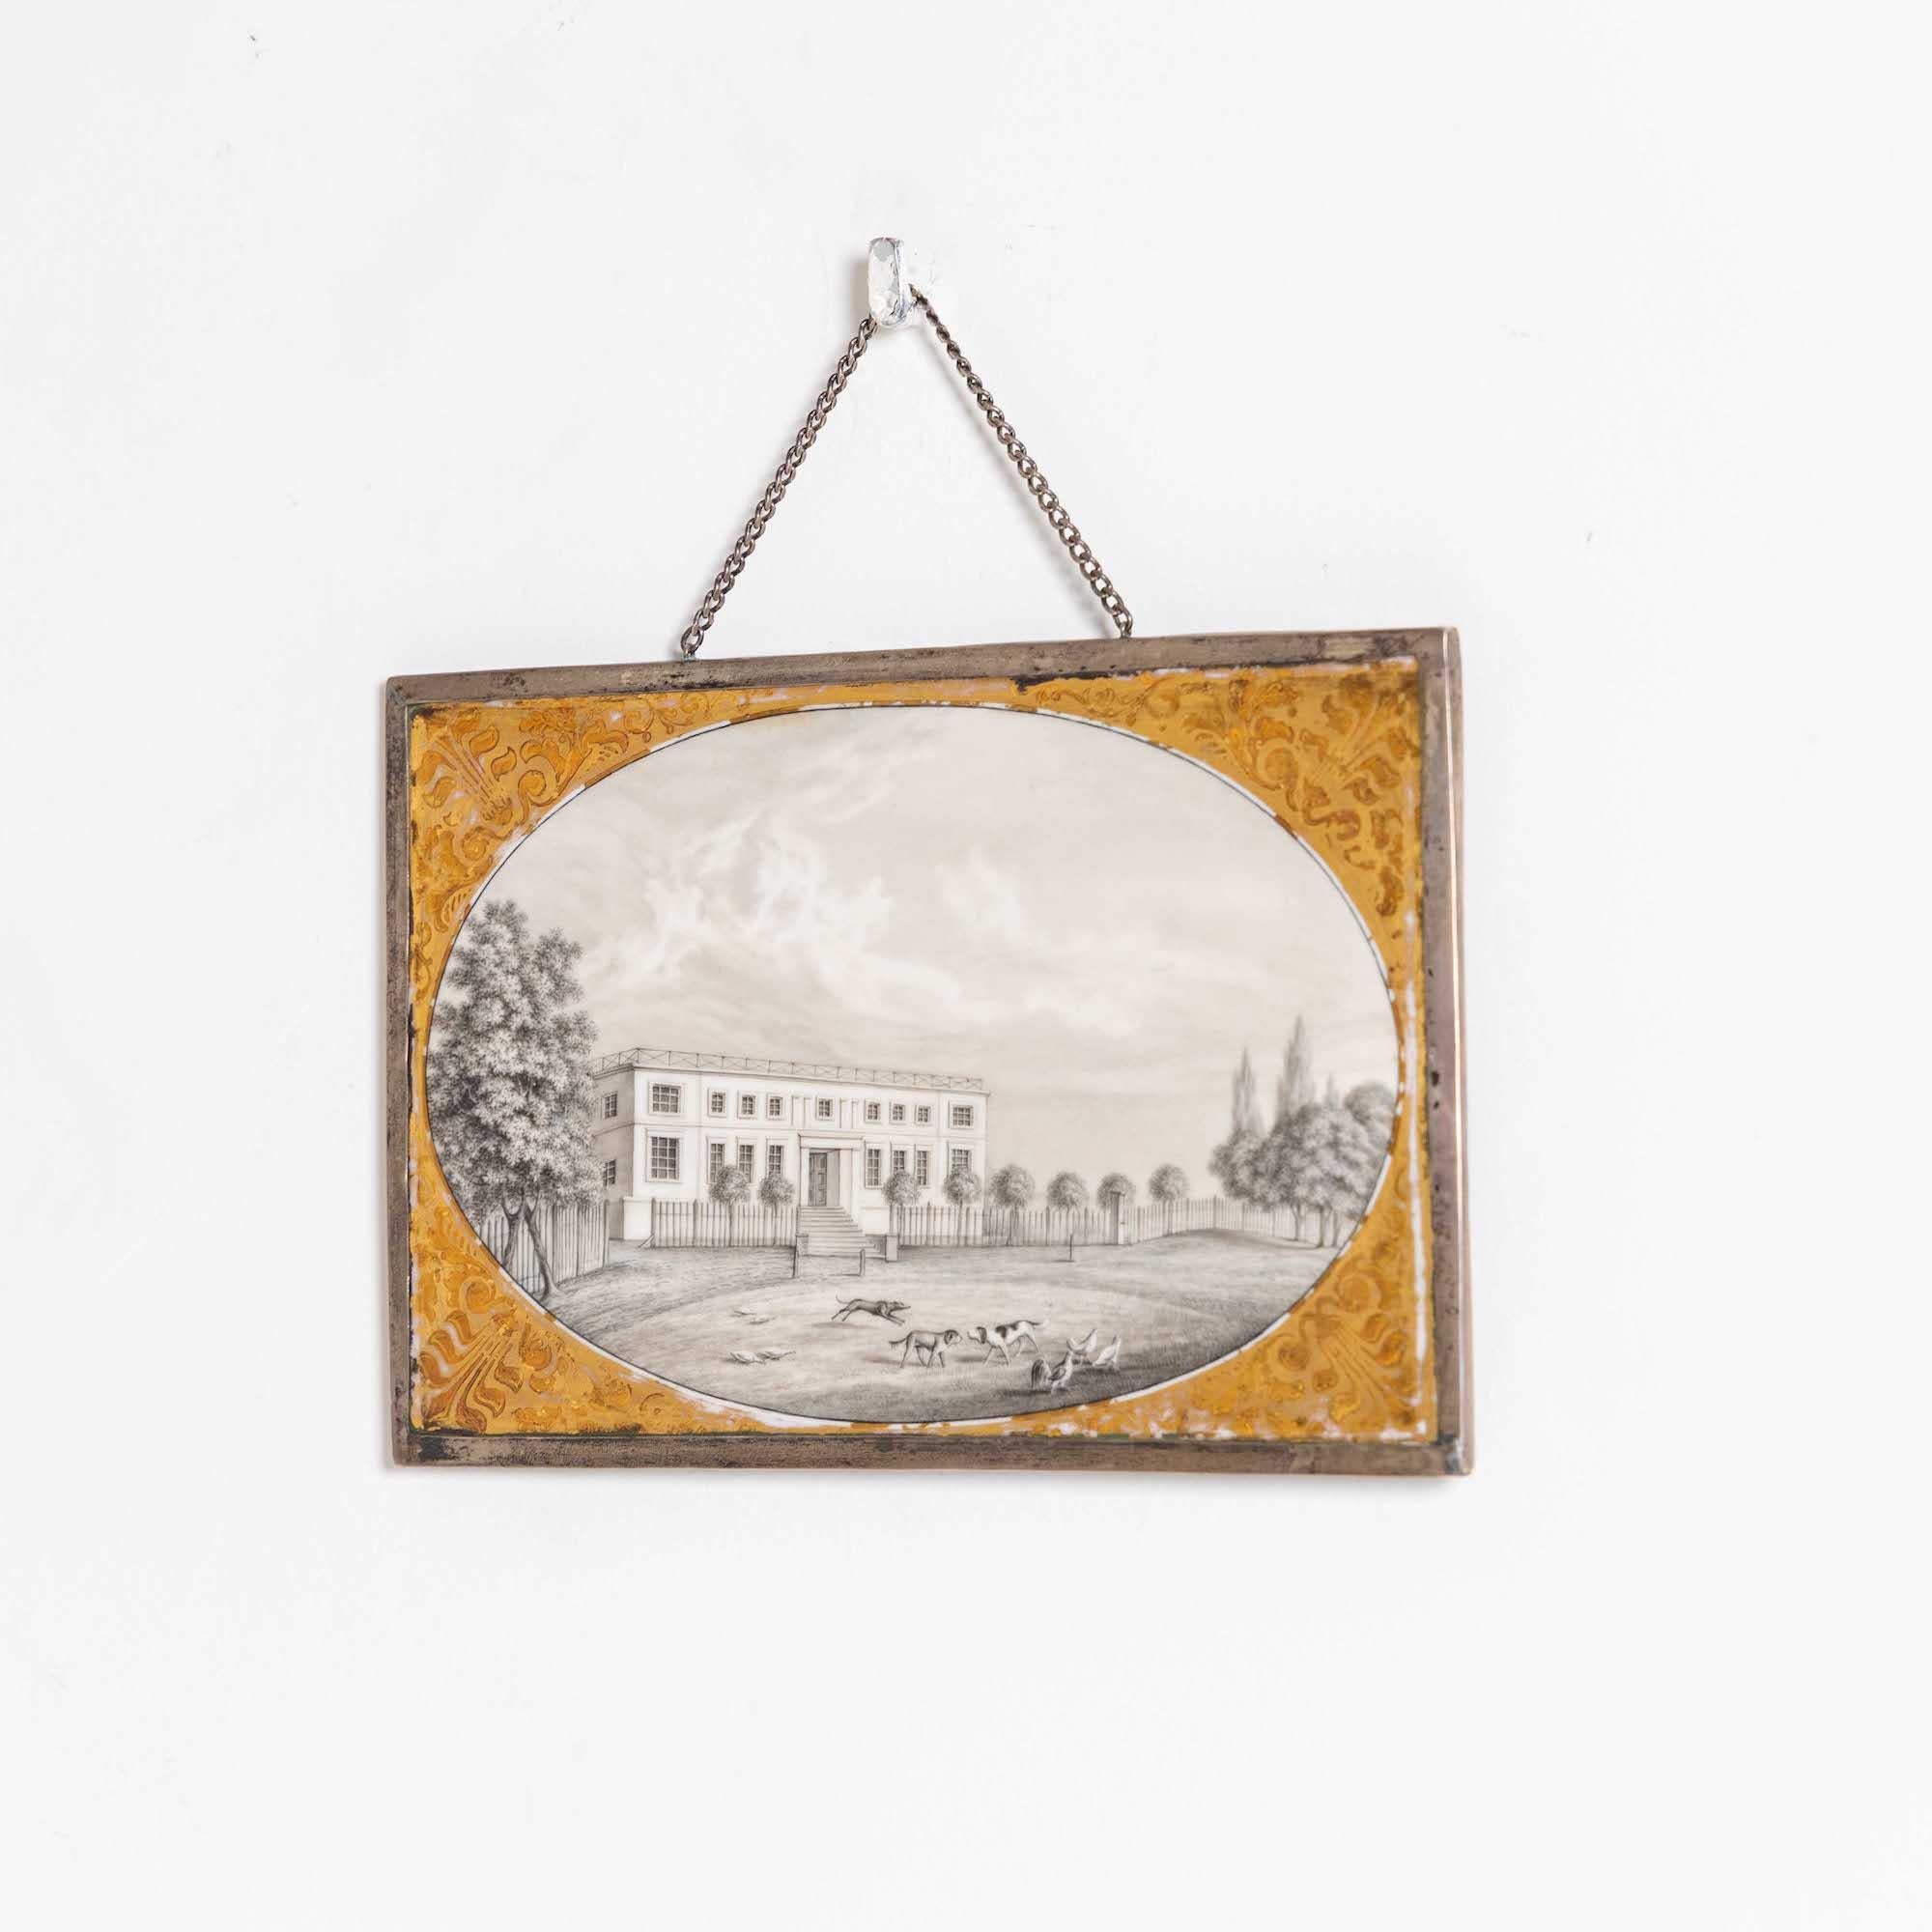 Small framed KPM porcelain picture plate in silver(?) frame with architectural view and hunting dogs playing in the foreground. 
